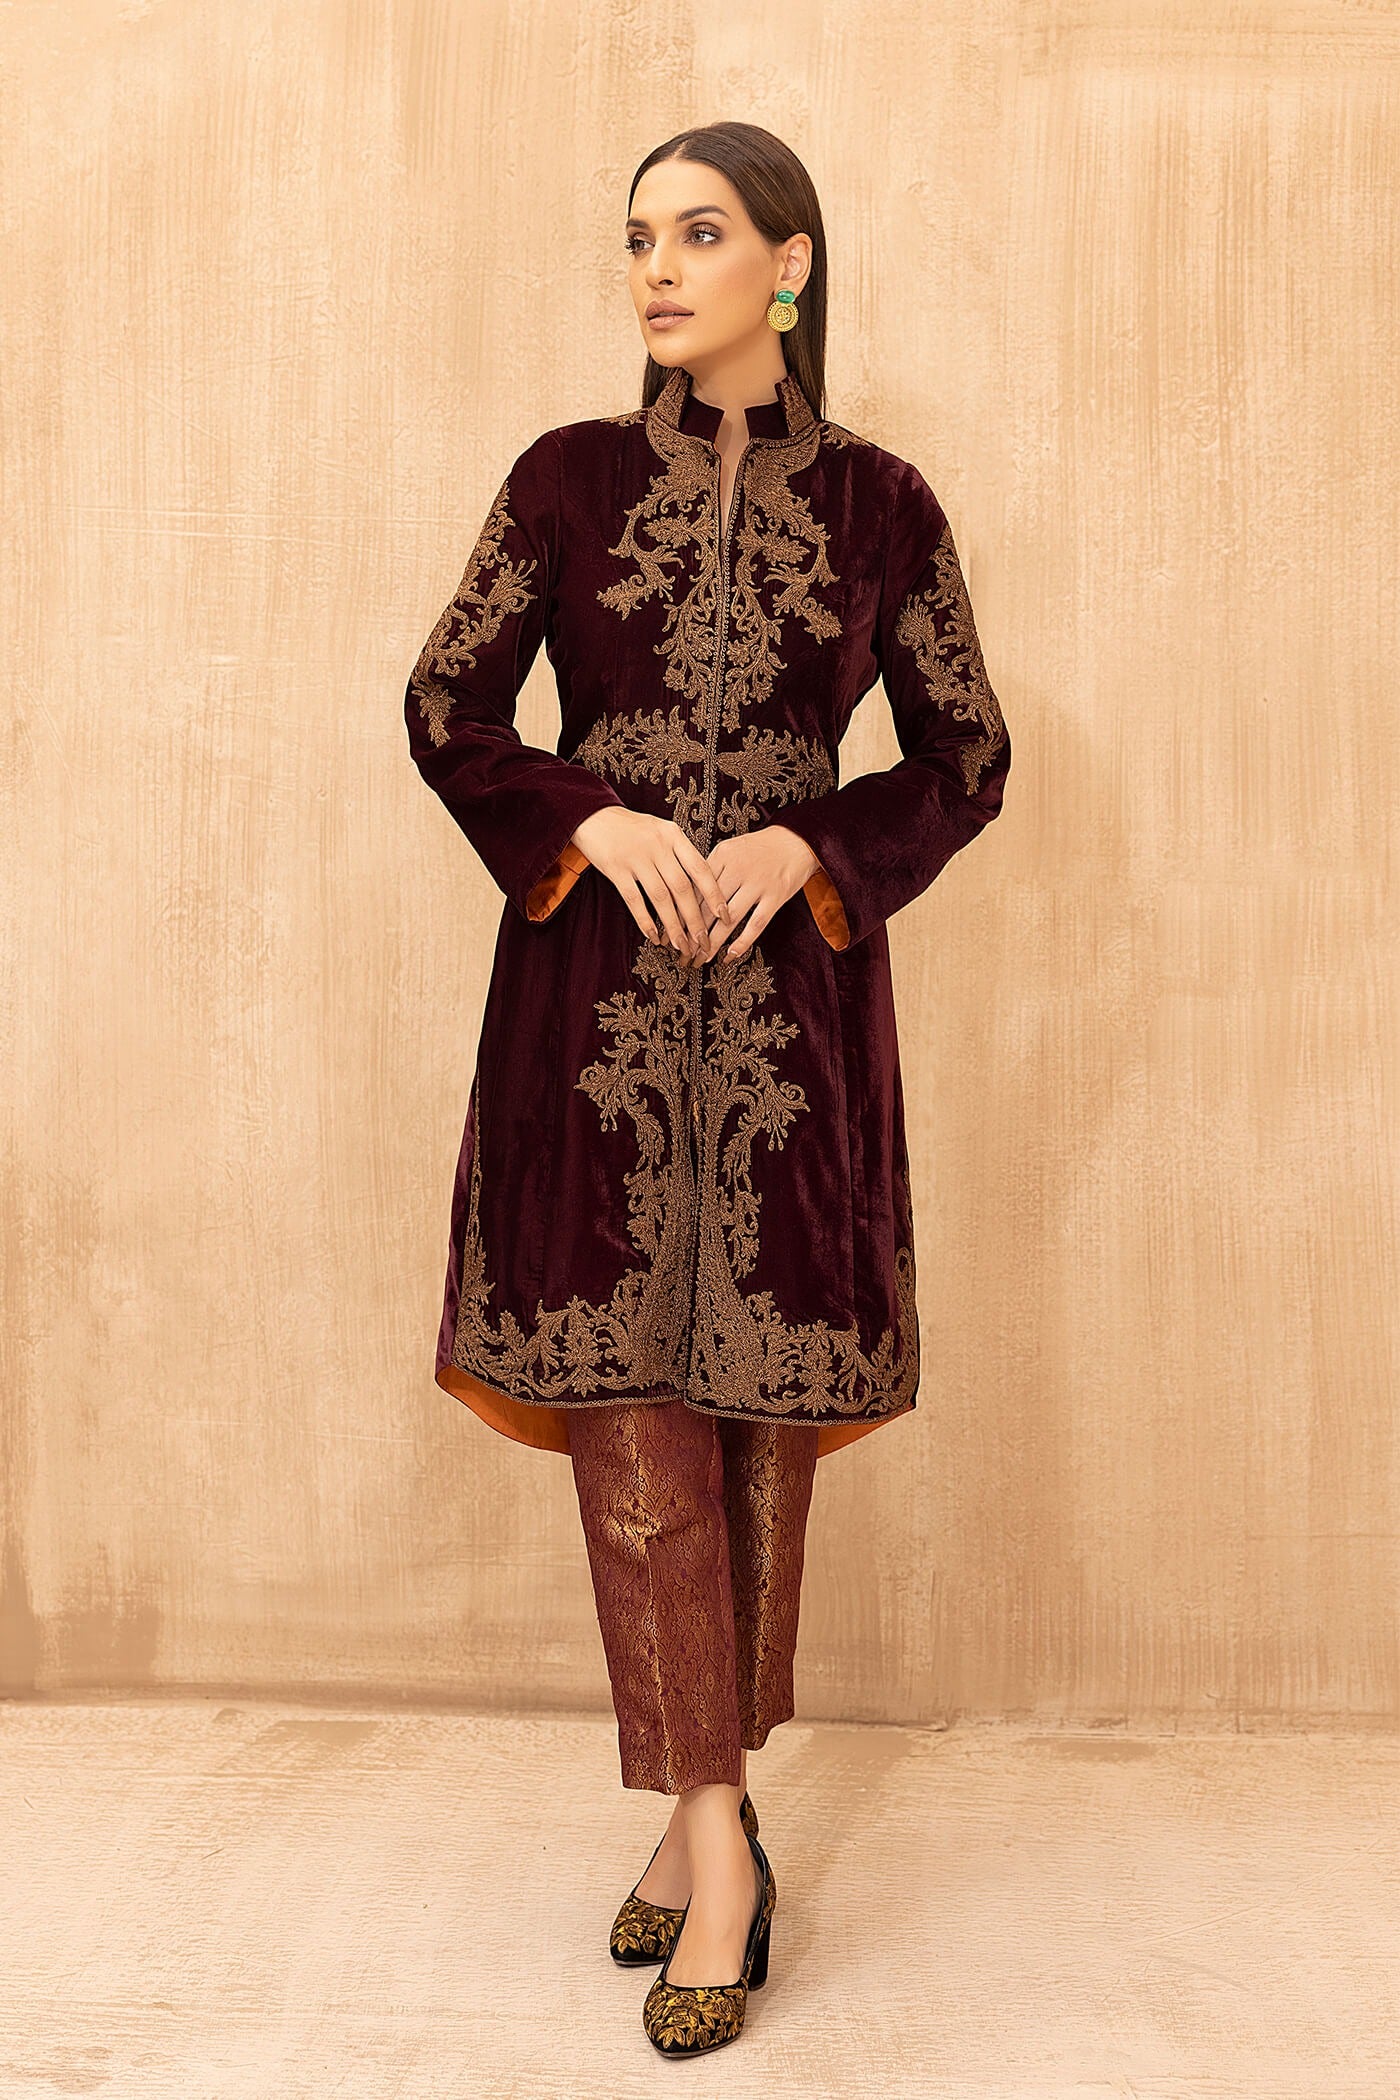 Charisma Rose - DAZZLING SPELL- WINTER COLLECTION'22 by Nilofer Shahid